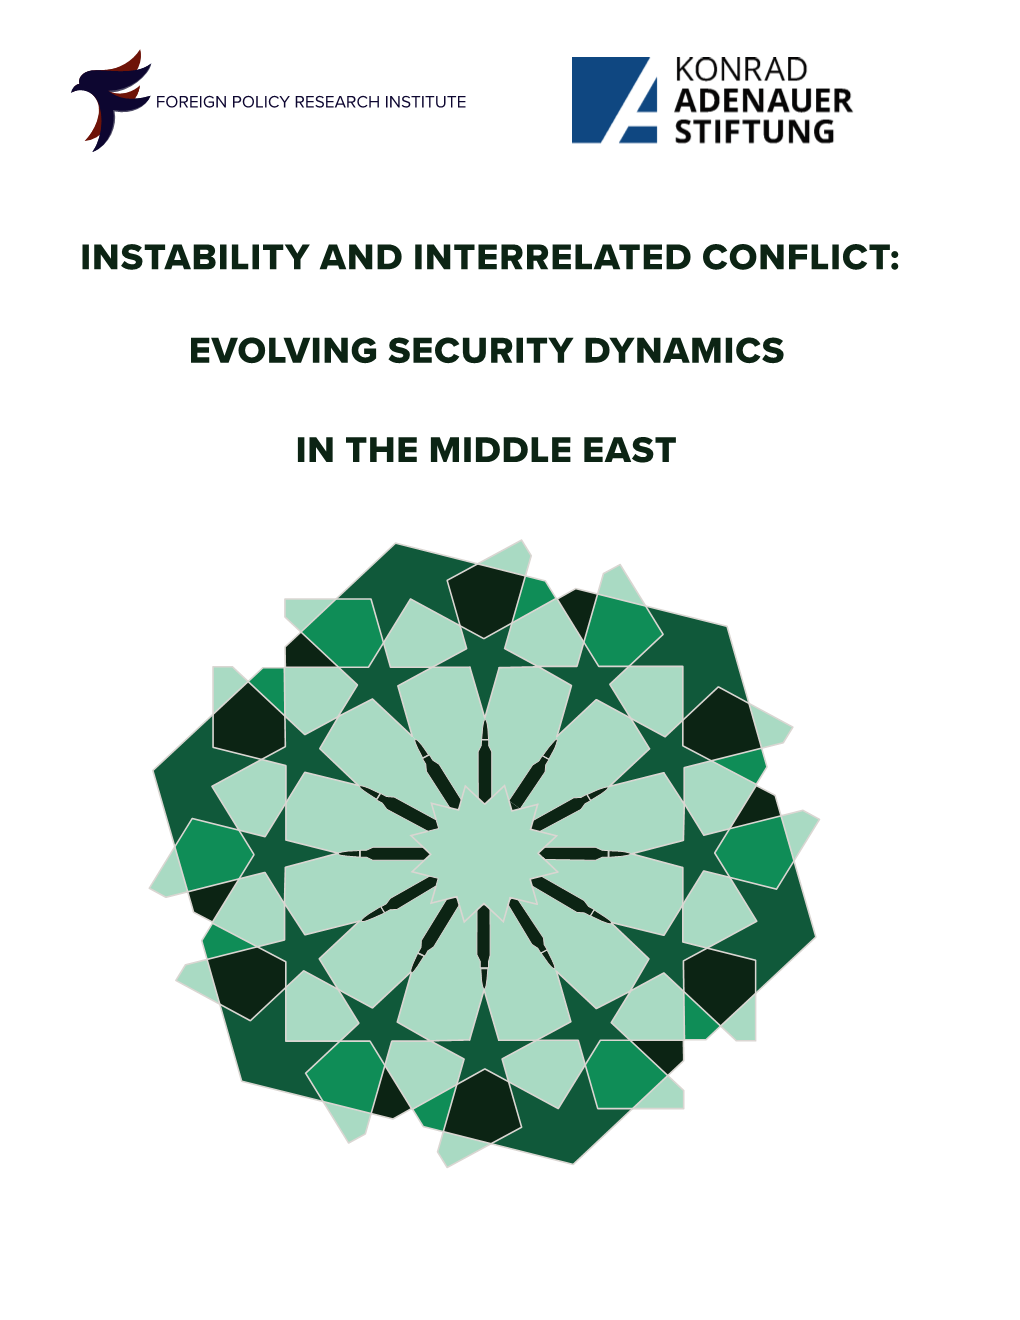 Instability and Interrelated Conflict: Evolving Security Dynamics in the Middle East